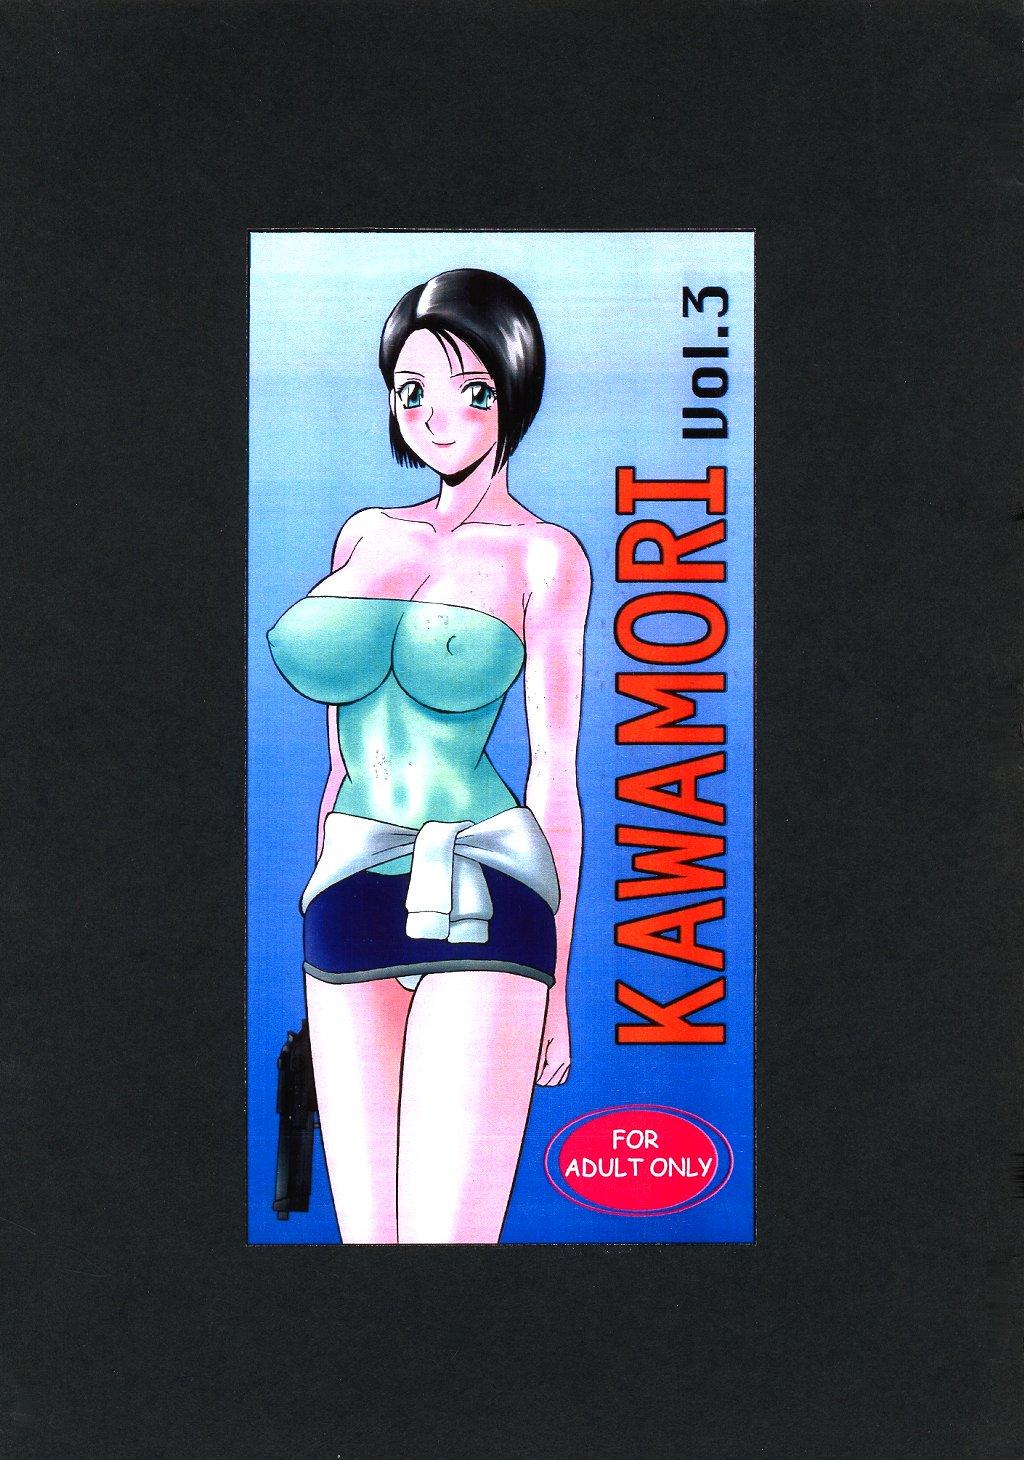 Clothed Sex Kawamori Vol. 3 - Resident evil Forwomen - Picture 1